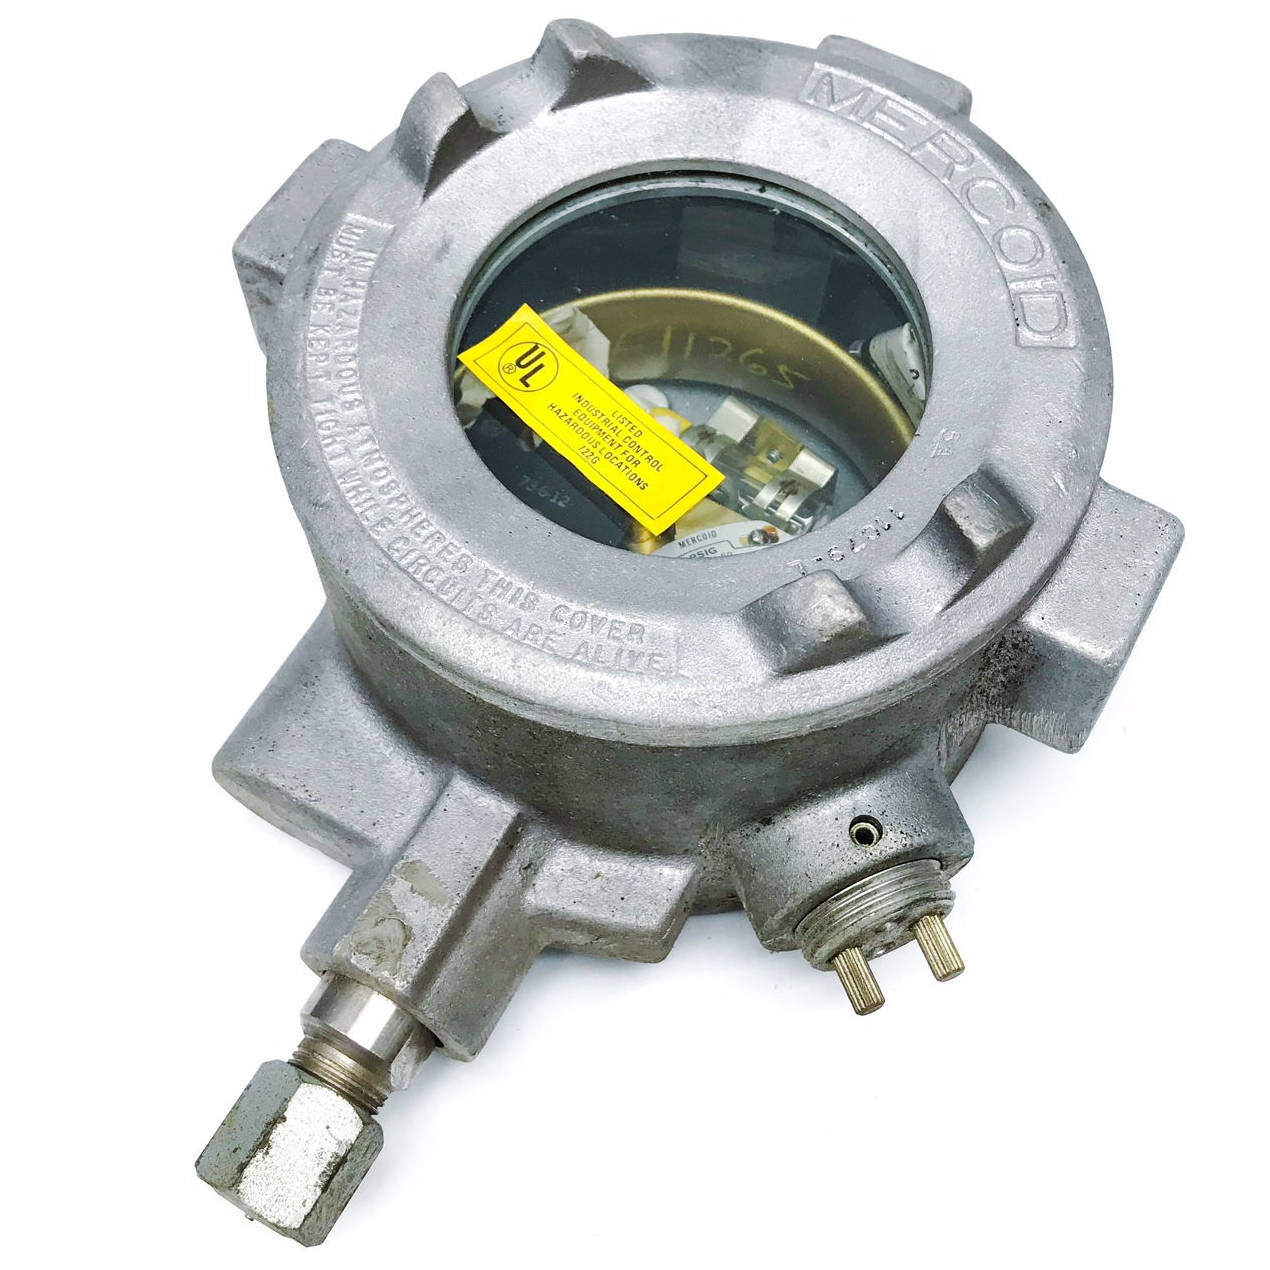 DAH31-3 Mercoid Control Pressure Switch Explosion Proof, Series D 1